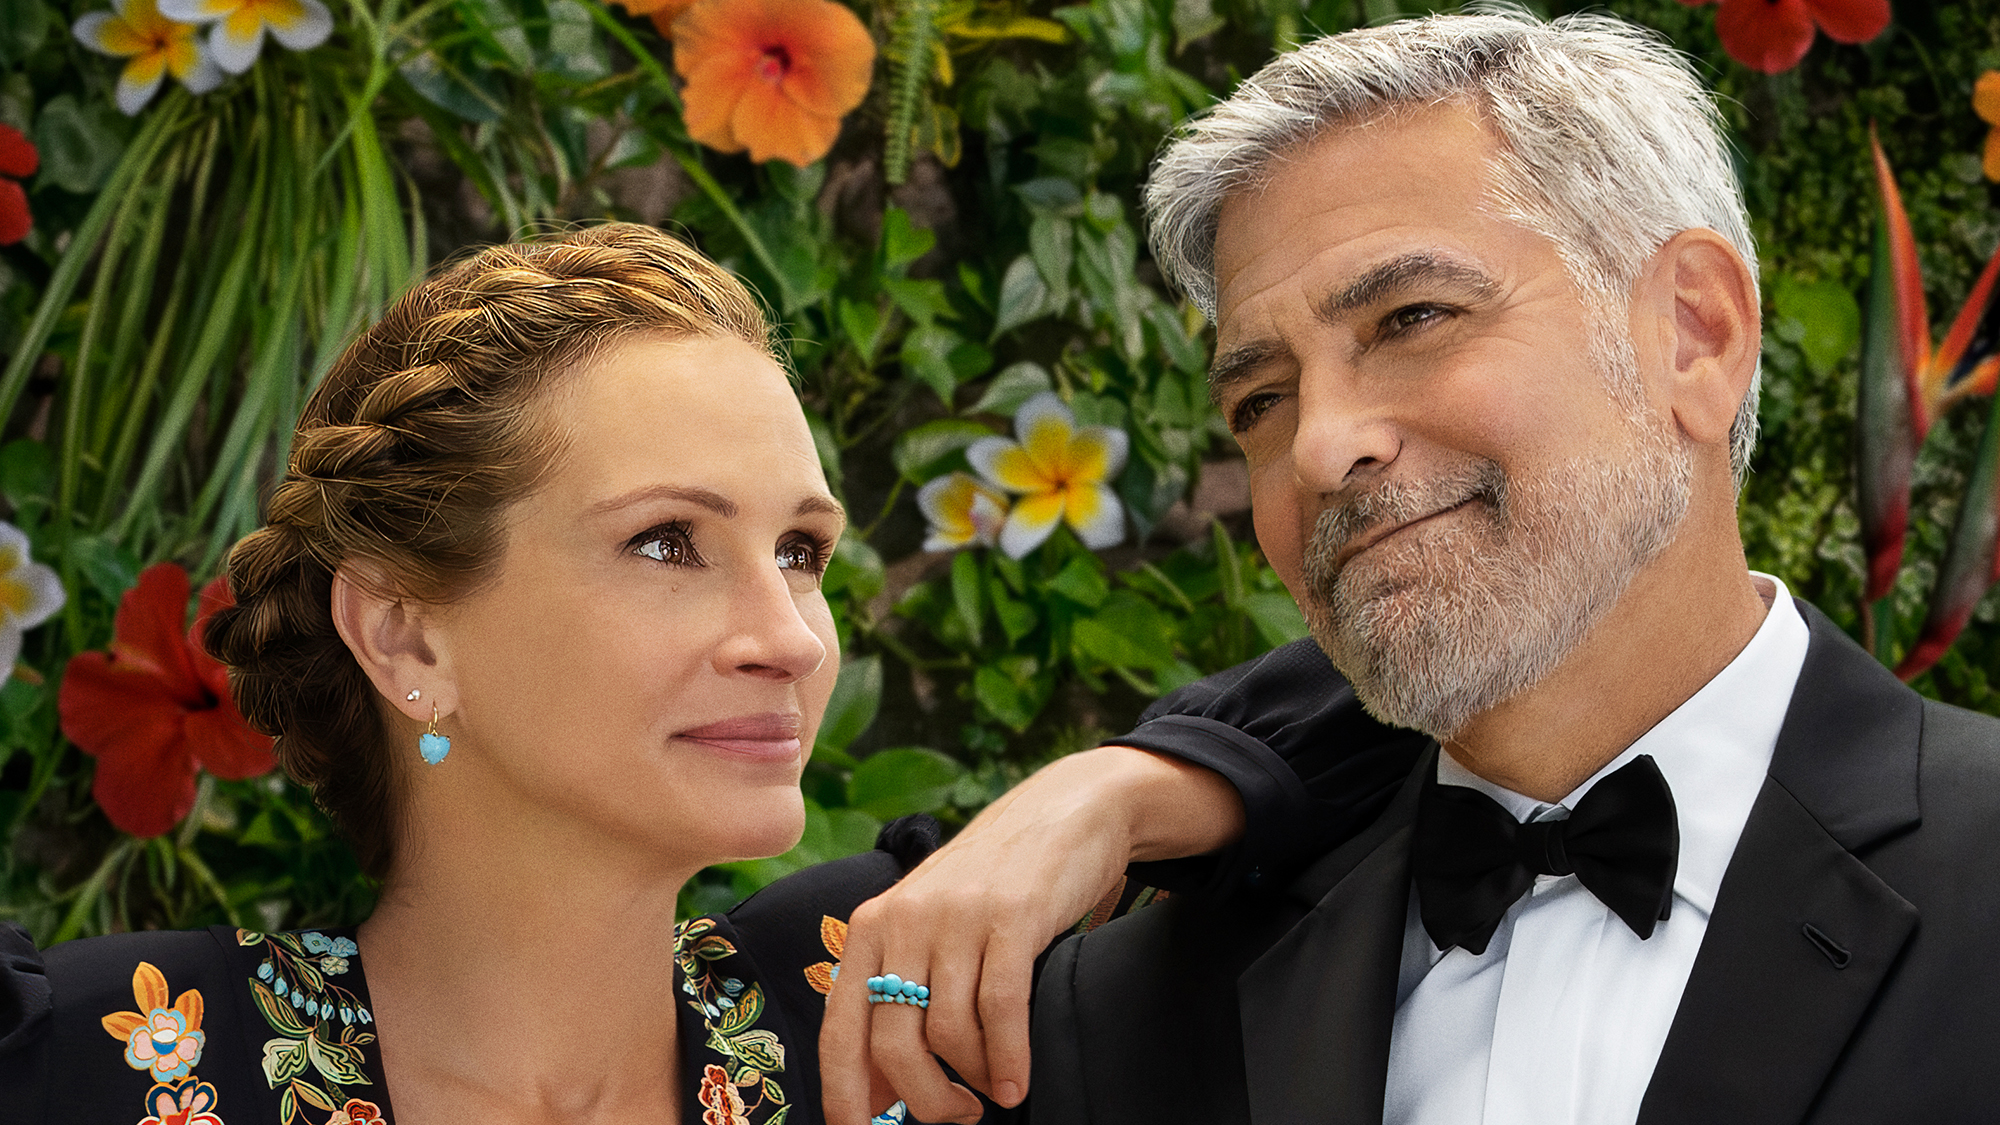 (Left to Right) Julia Roberts and George Clooney in front of flowers on the poster for Ticket to Paradise.